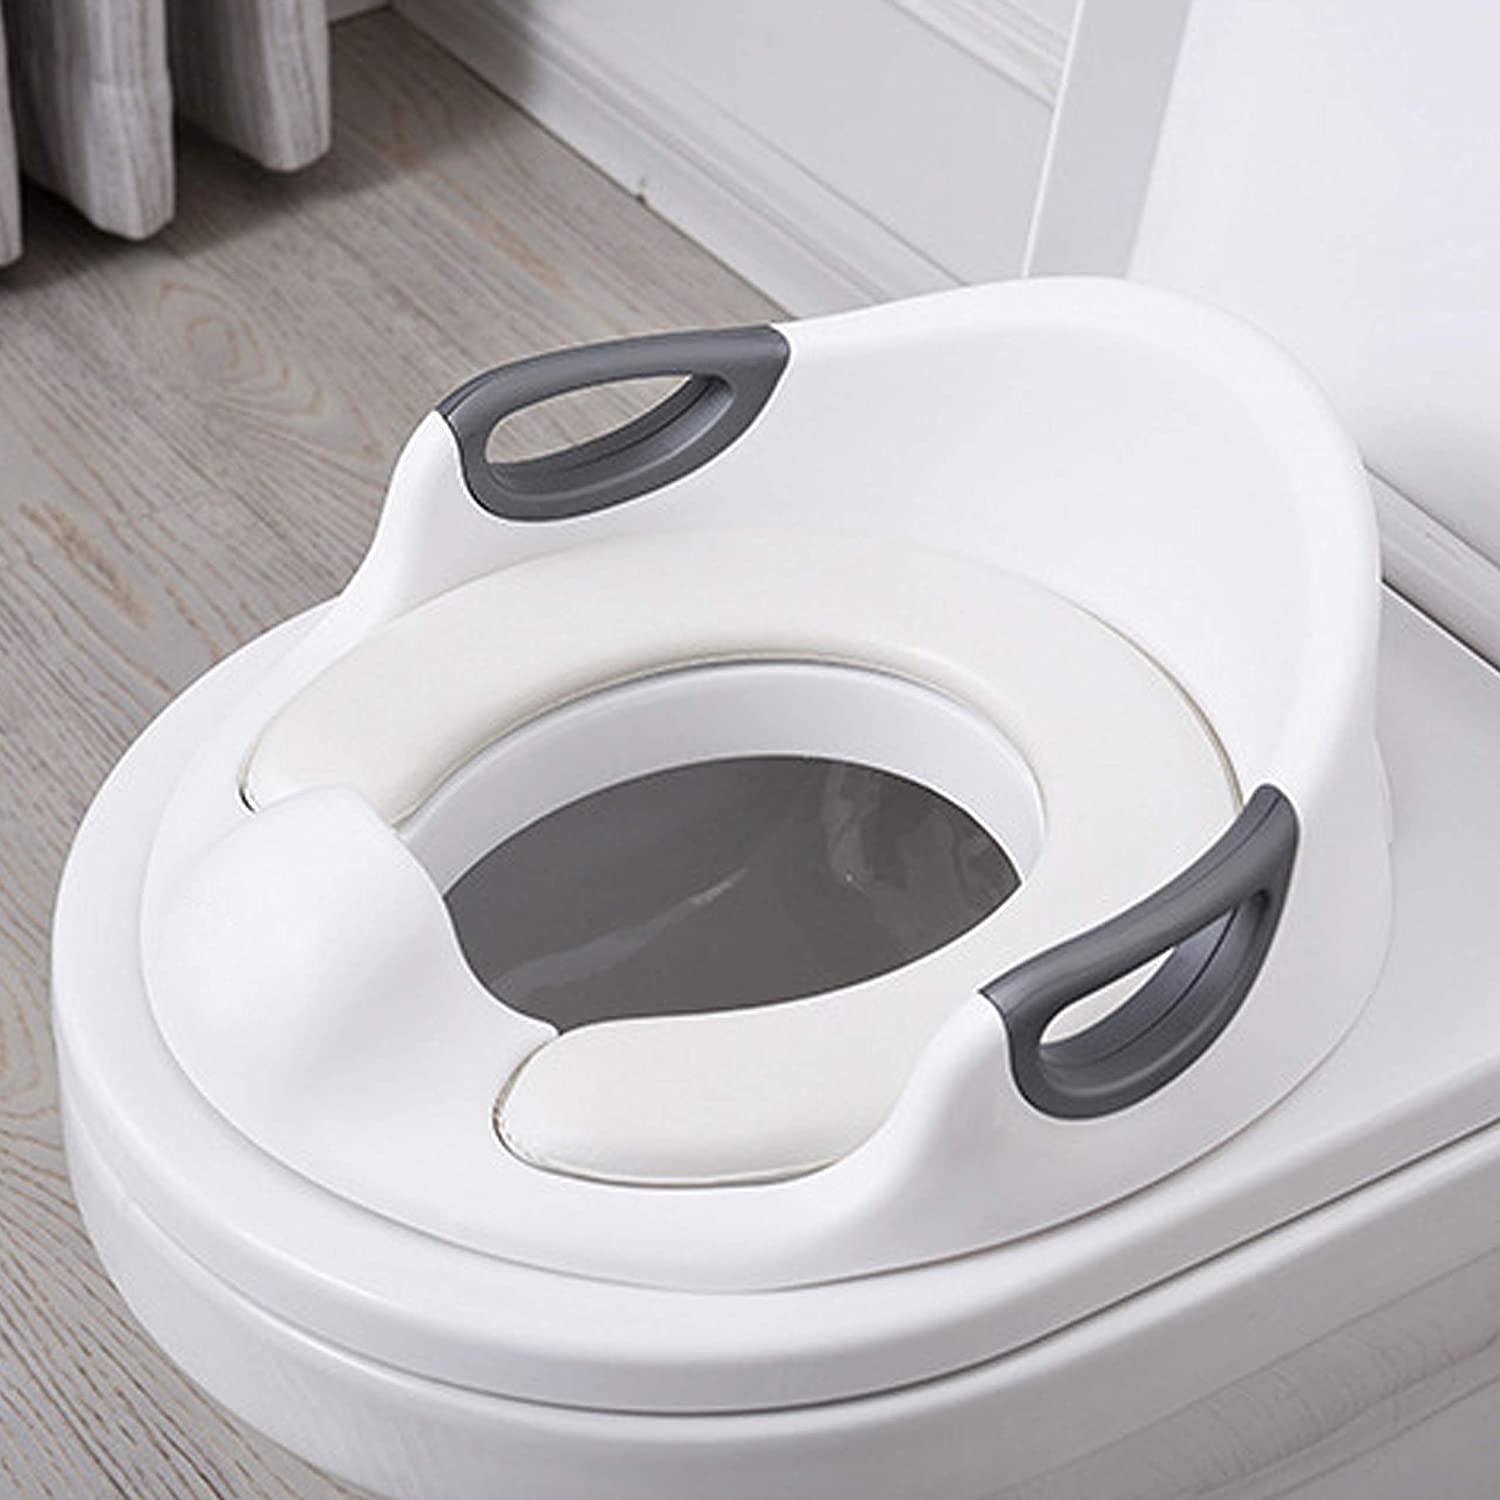 Potty Training Seat with High Splash Guard, Baby Toliet Trainer Seat for Boy&Girl with Handles, Safty Potty Chair for Kids with High Backrest 